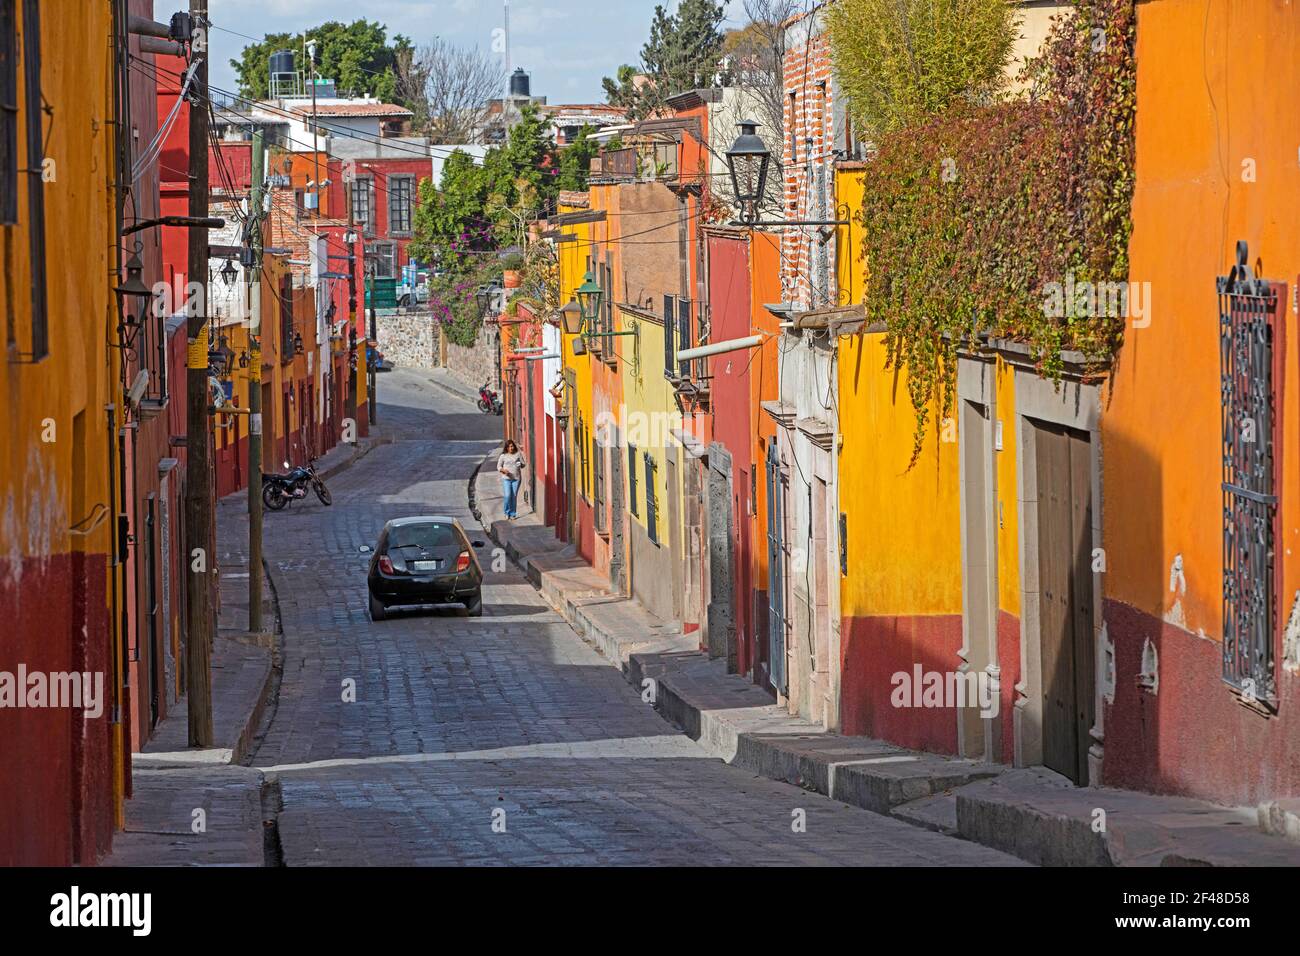 Narrow street with colourful houses in the city San Miguel de Allende, Guanajuato, Central Mexico Stock Photo